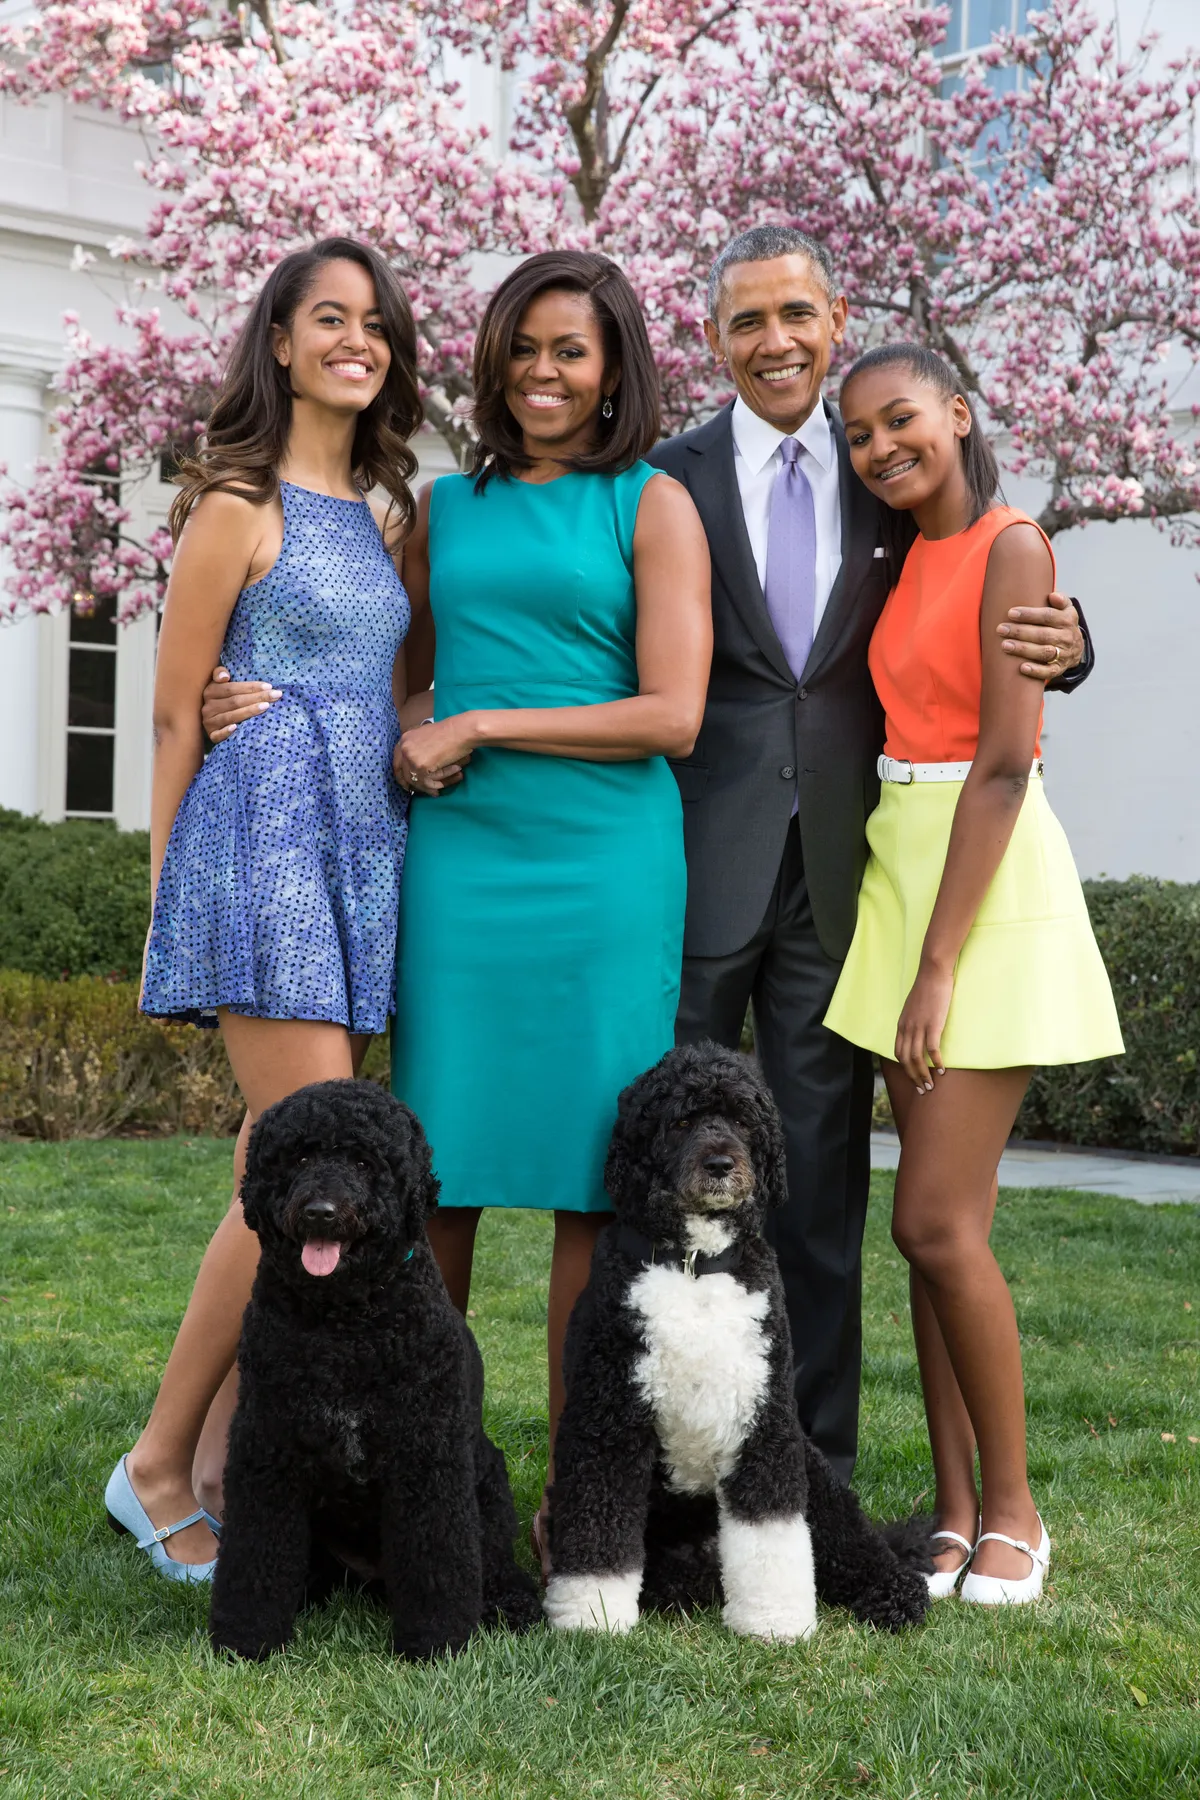 Malia, Michelle, Barack, and Sasha Obama posing in front of The White House as The First Family with their pets in Washington in 2015 | Source: Getty Images